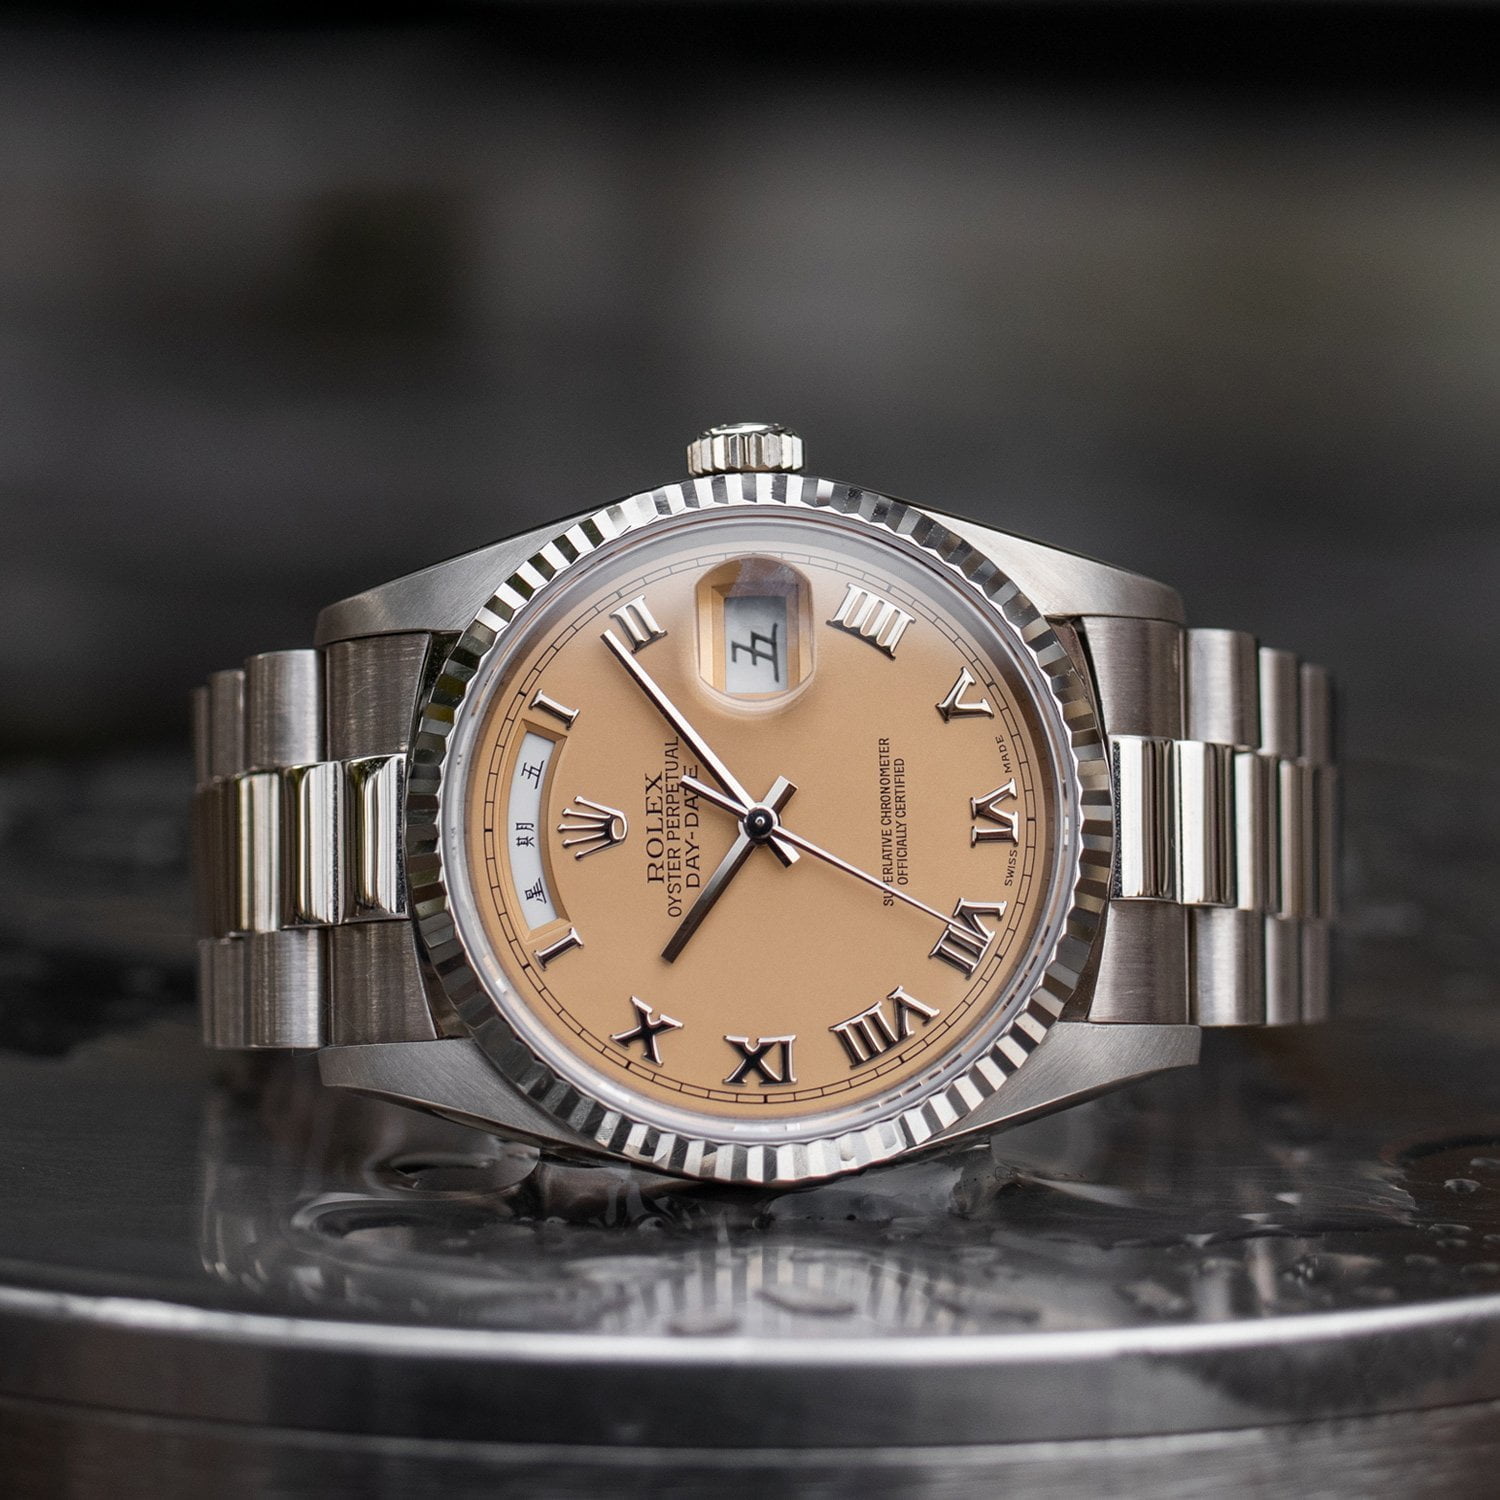 rolex day date salmon dial